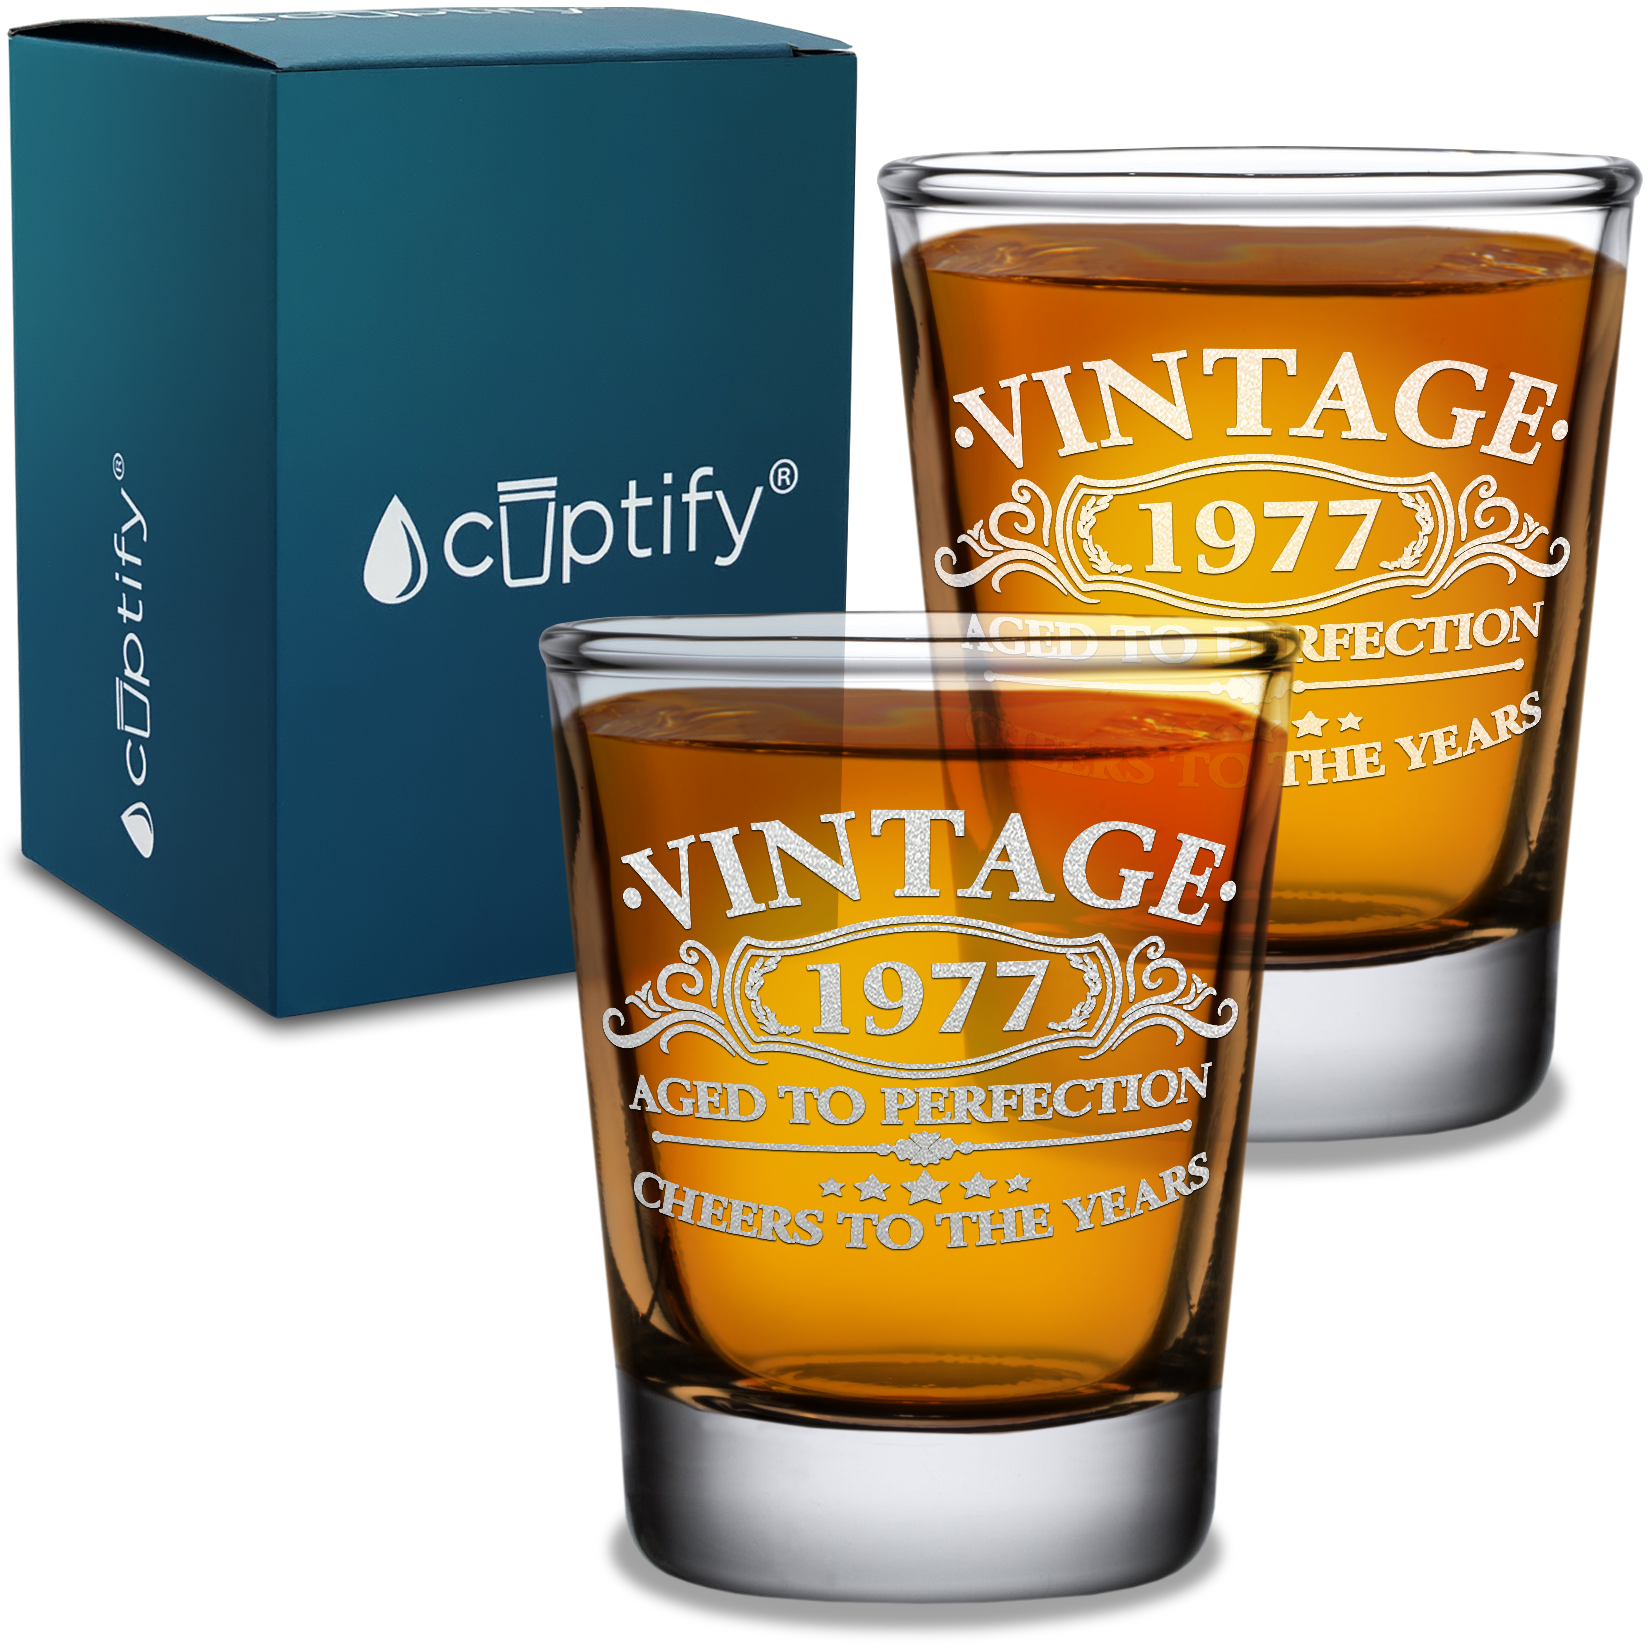 44th Birthday Gift Vintage Aged To Perfection Cheers To 44 Years 1977 Laser Engraved on 2oz Shot Glasses - Set of 2